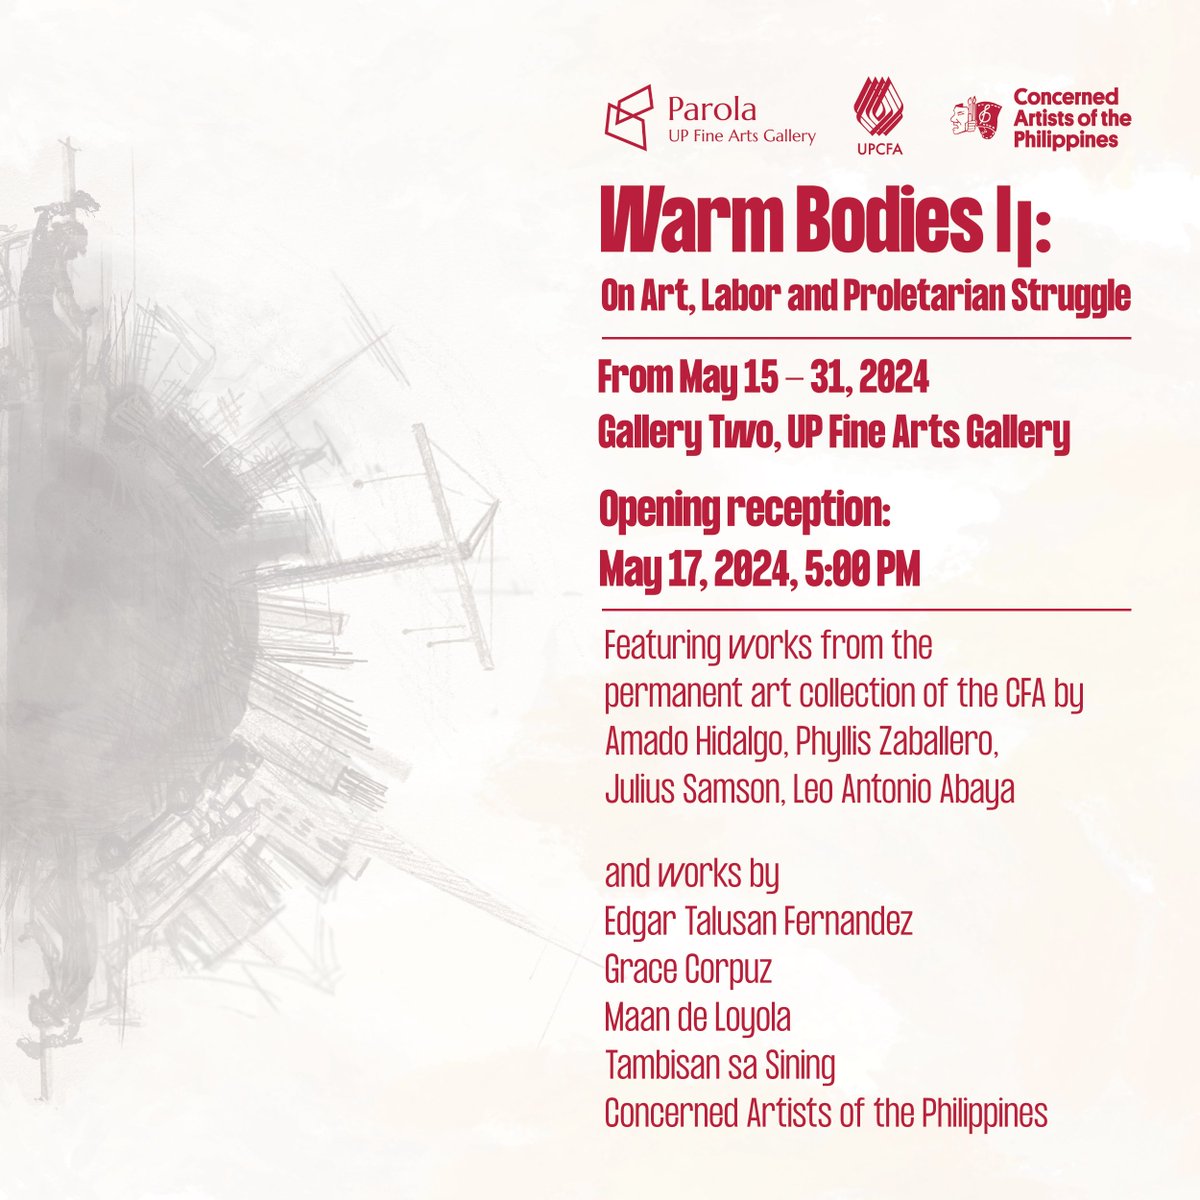 Press Release WARM BODIES II: On Art, Labor, and Proletarian Movements Opening on May 17, 5:00 P.M. On view from May 15-31, 2024 Gallery Two, UP Fine Arts Gallery UP College of Fine Arts, UP Diliman Art Exhibit in honor of Labor Day 2024 opens at the UP Fine Arts Gallery.